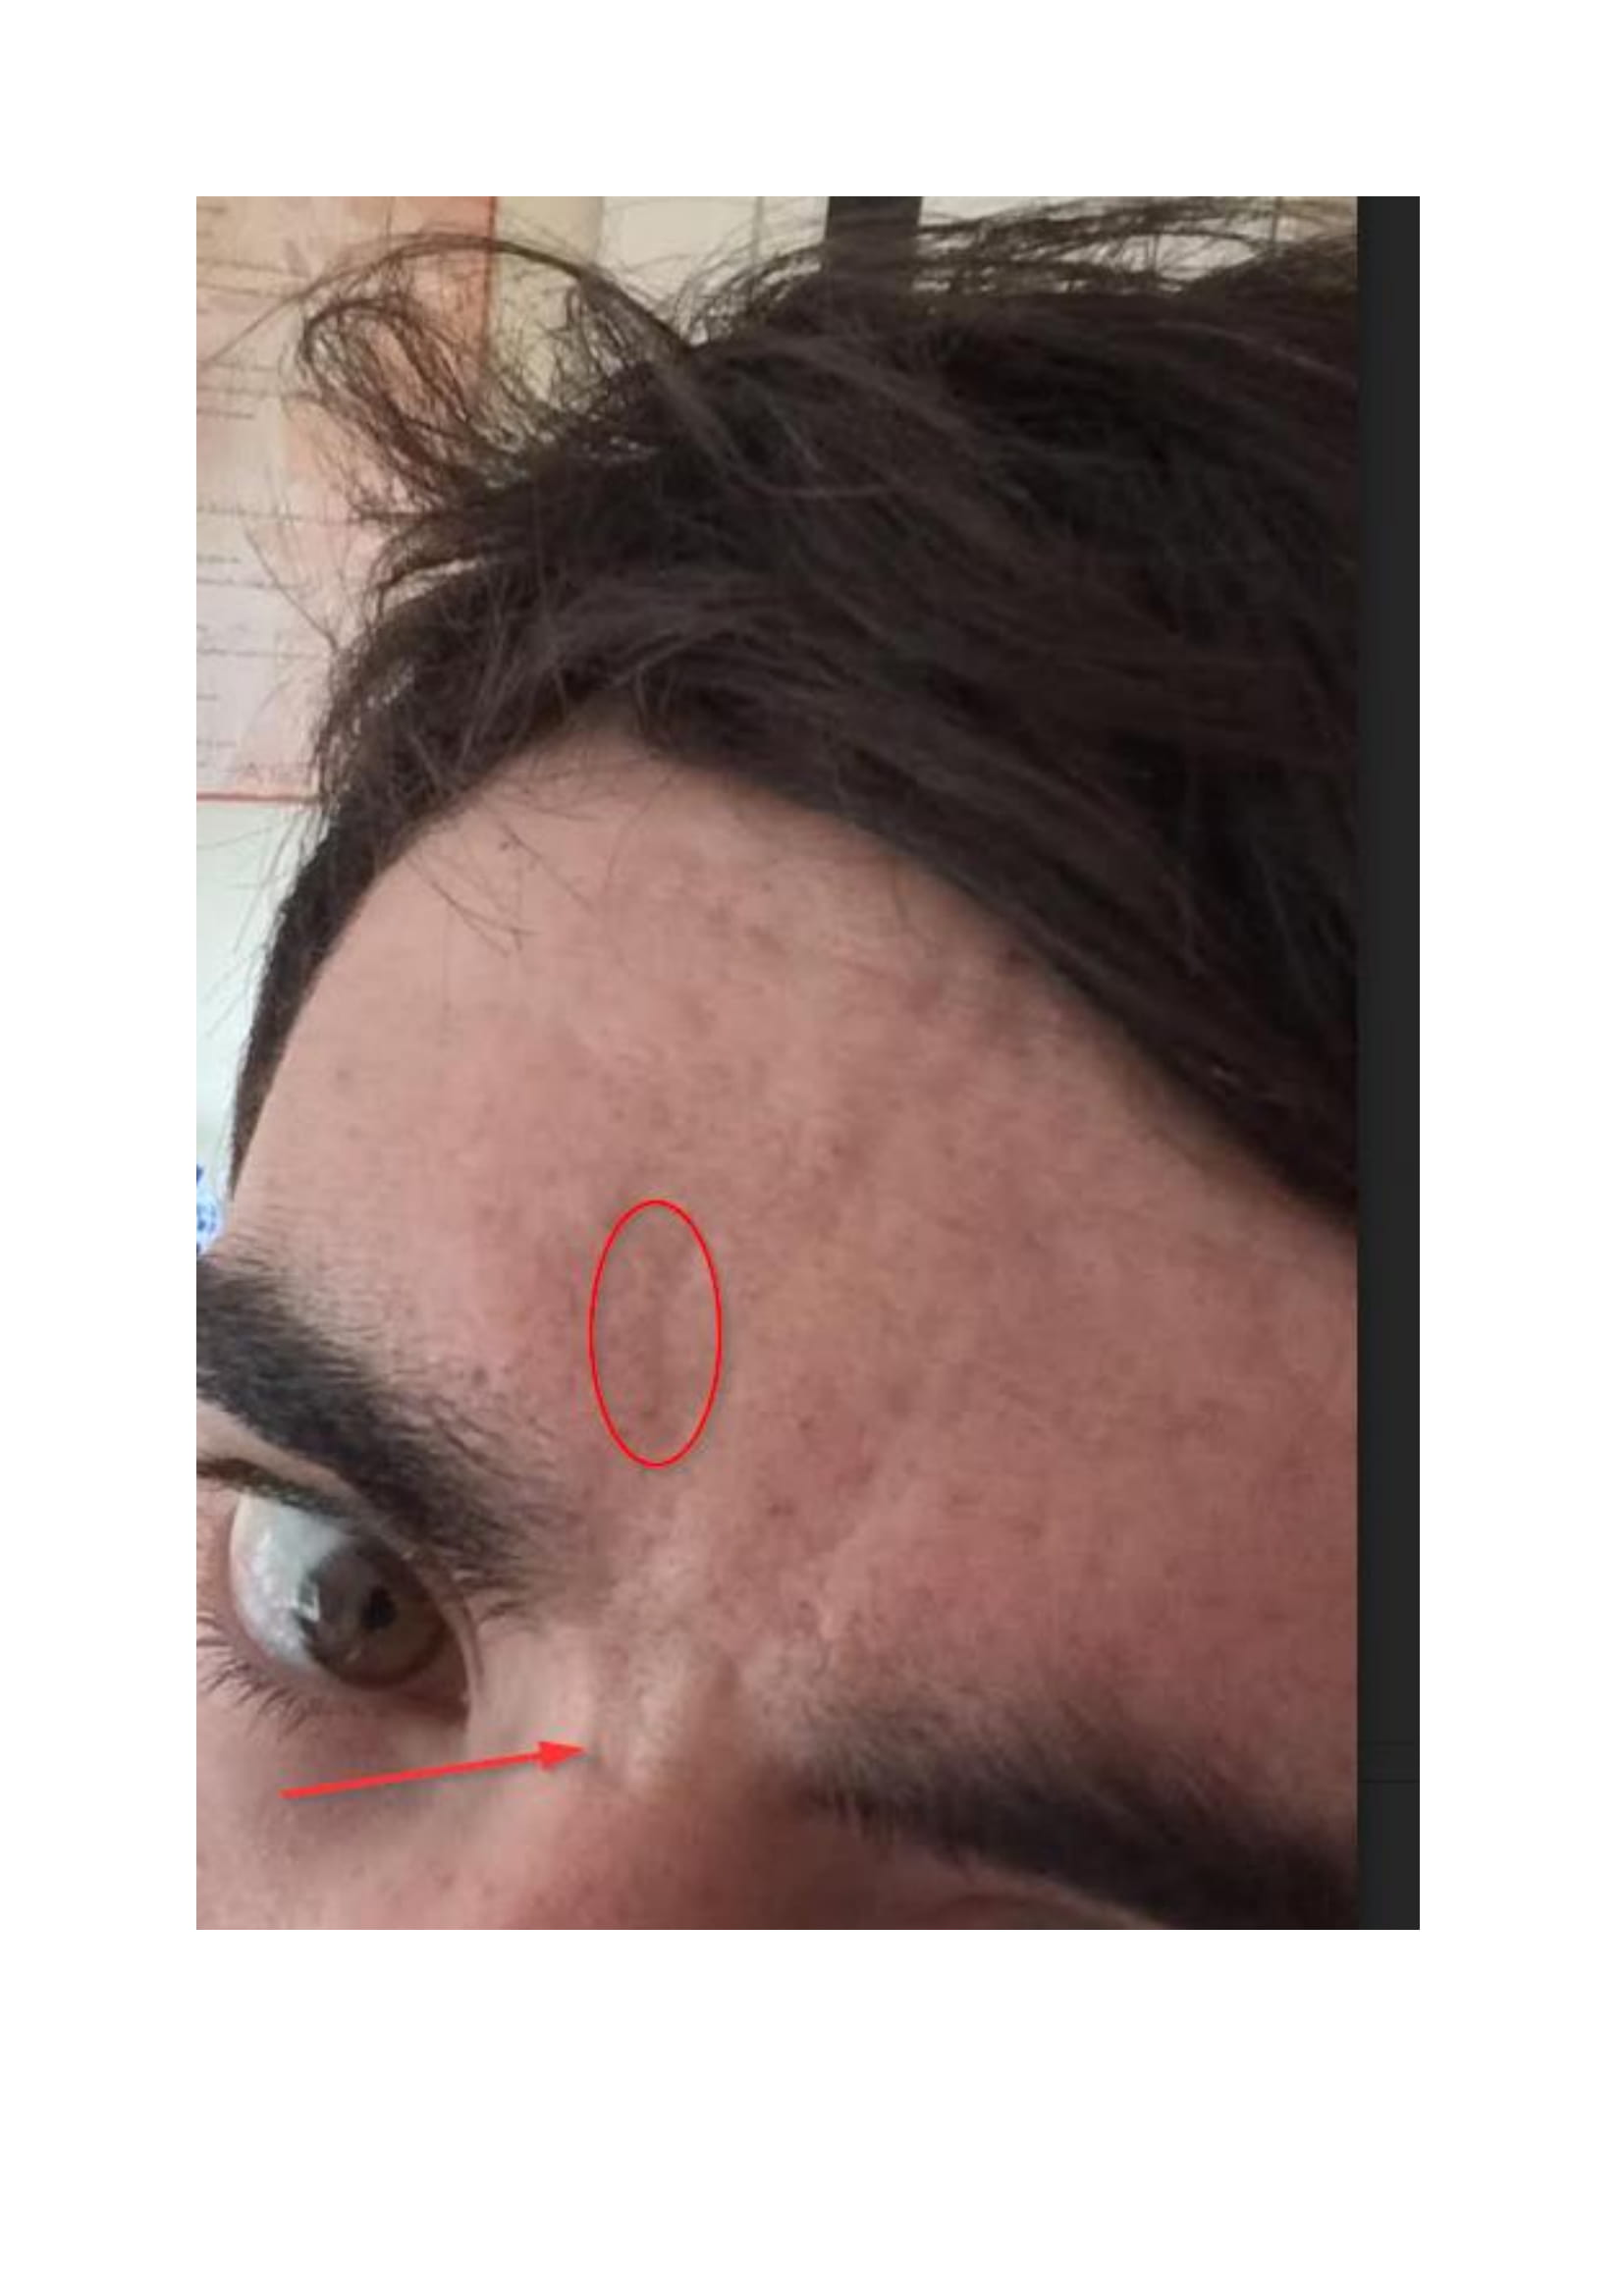 Severe Forehead Scarring Textural Damage How Best To Proceed Scar